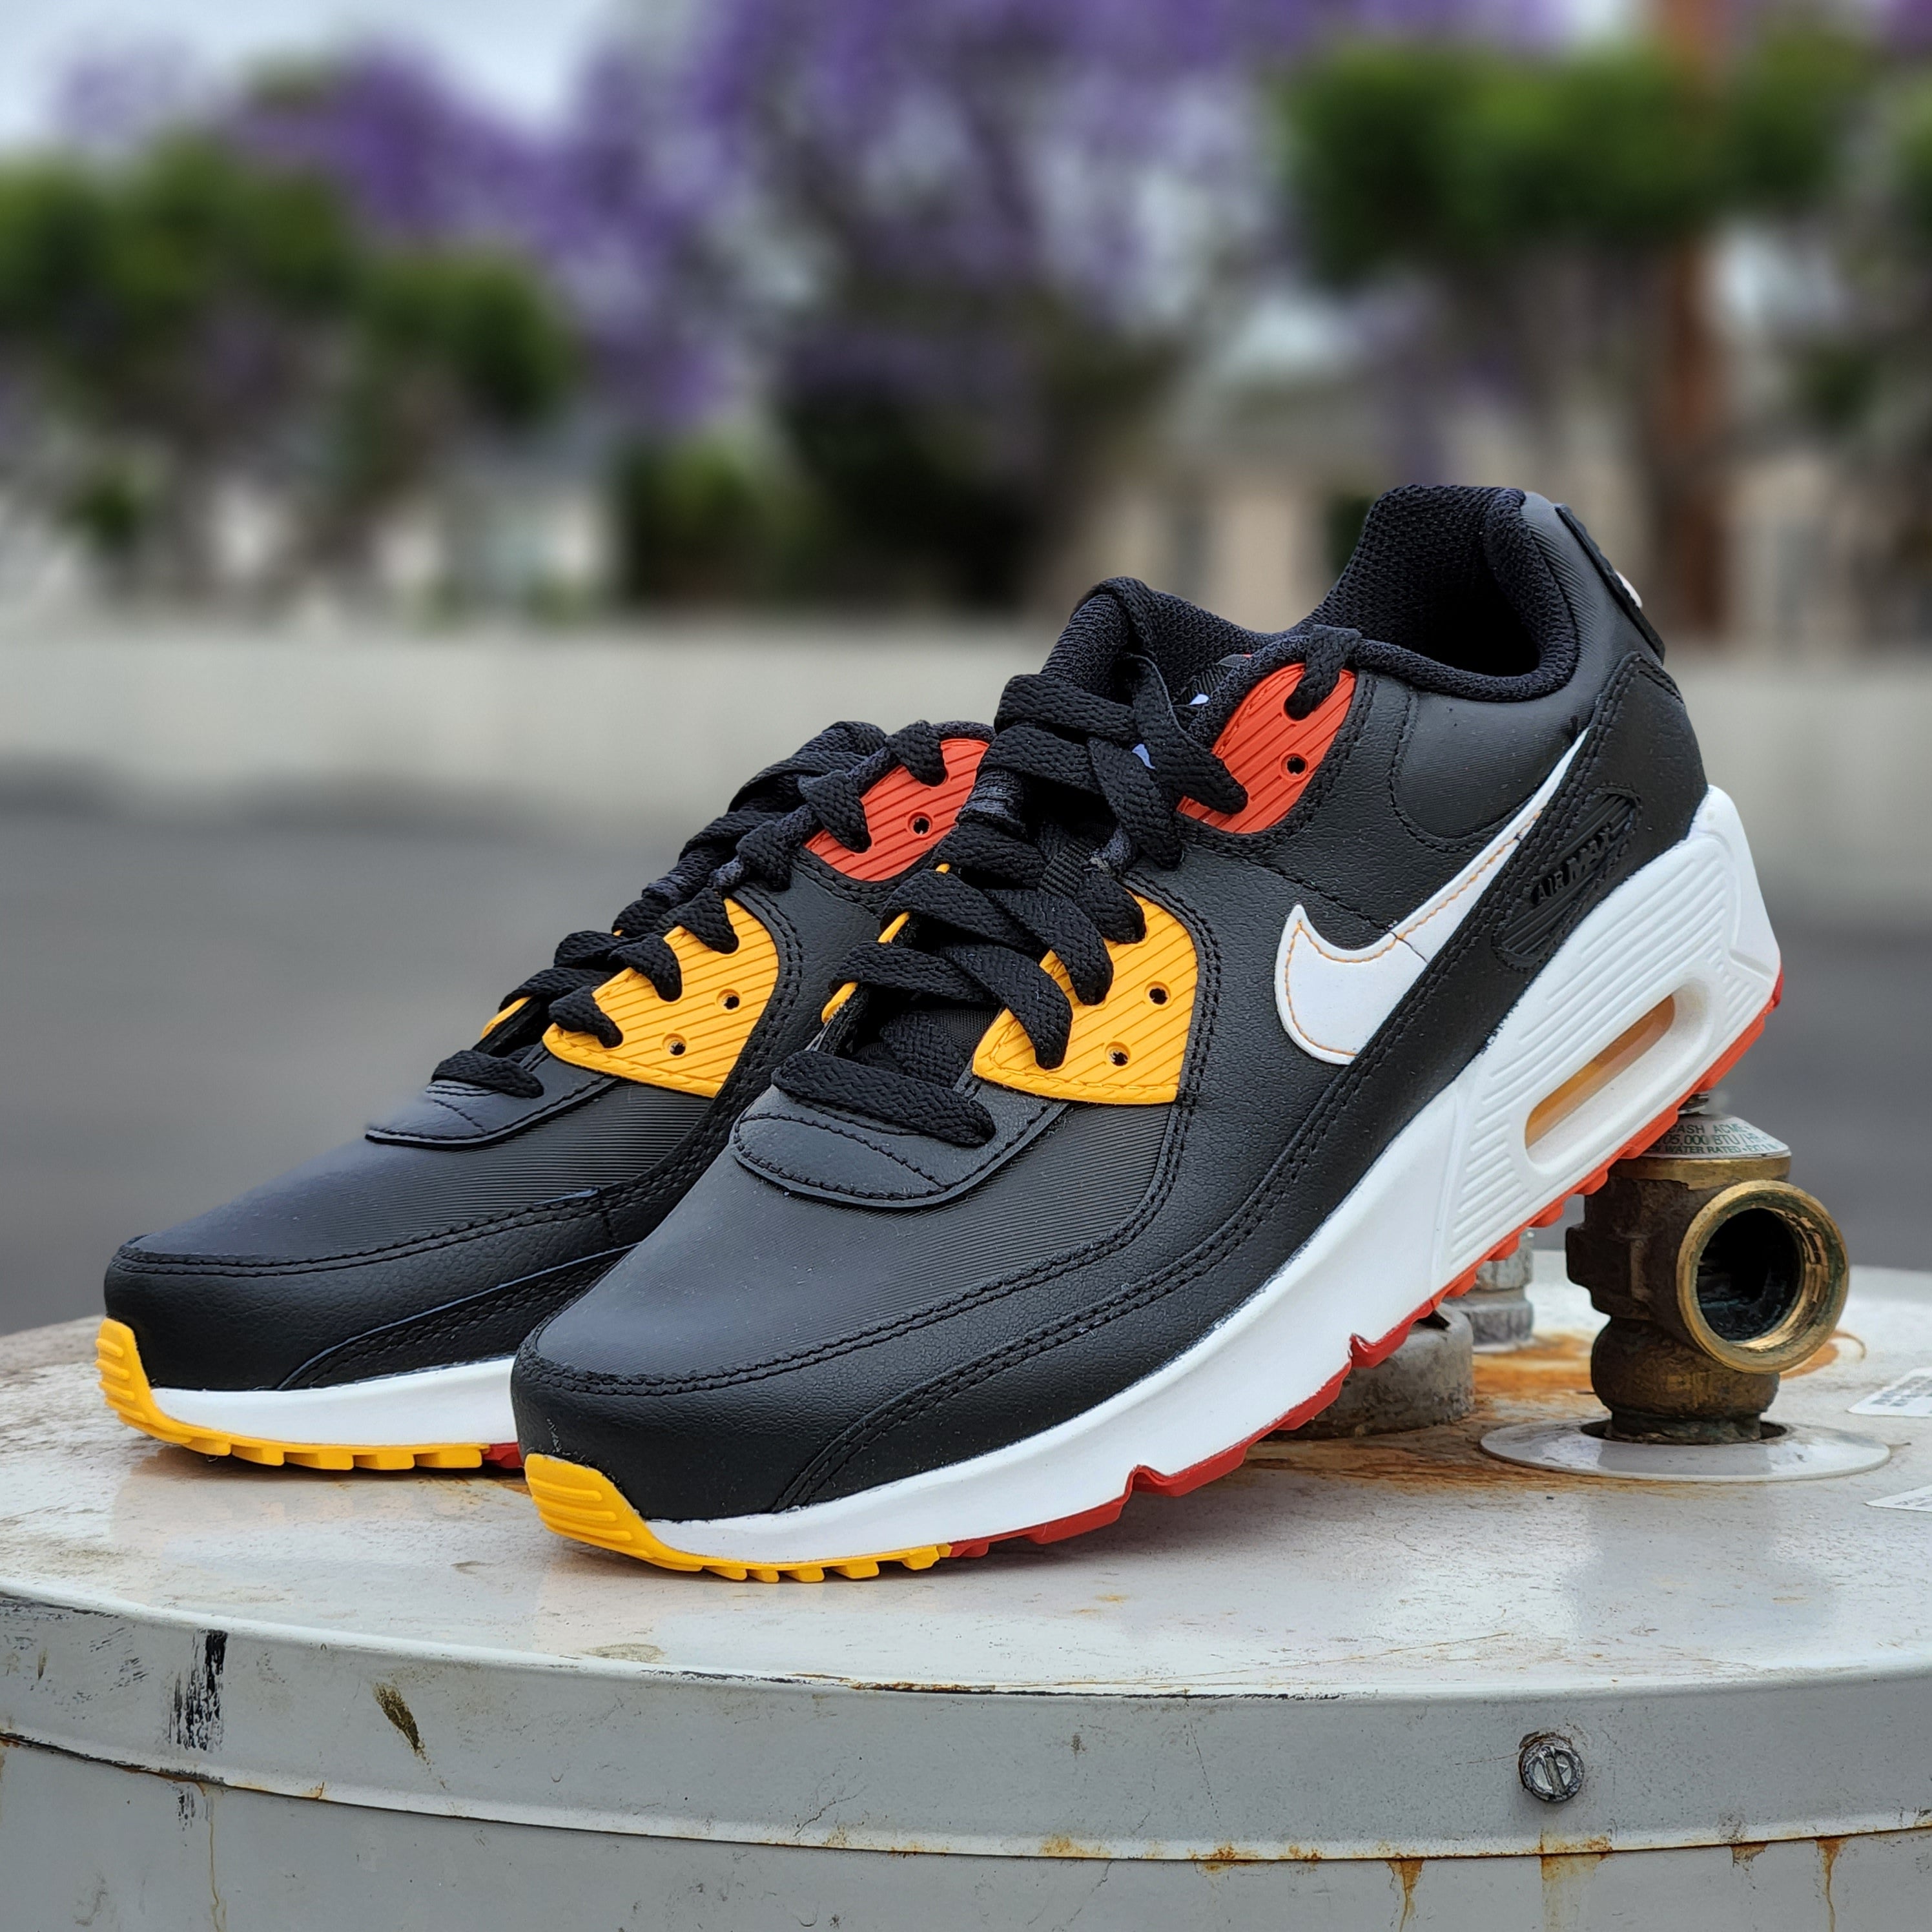 mout optillen cruise Nike Air Max 90 LTR GS Germany – PRIVATE SNEAKERS